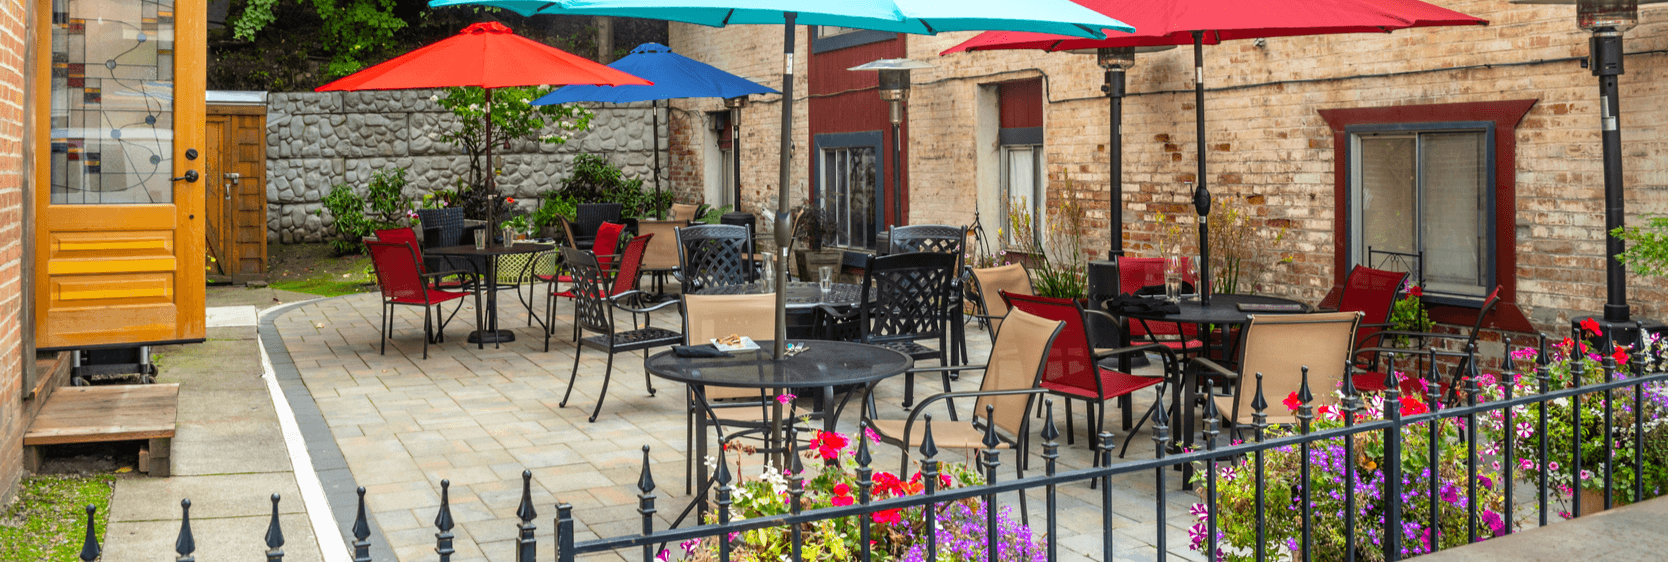 colorful patio seating in Wallace Idaho